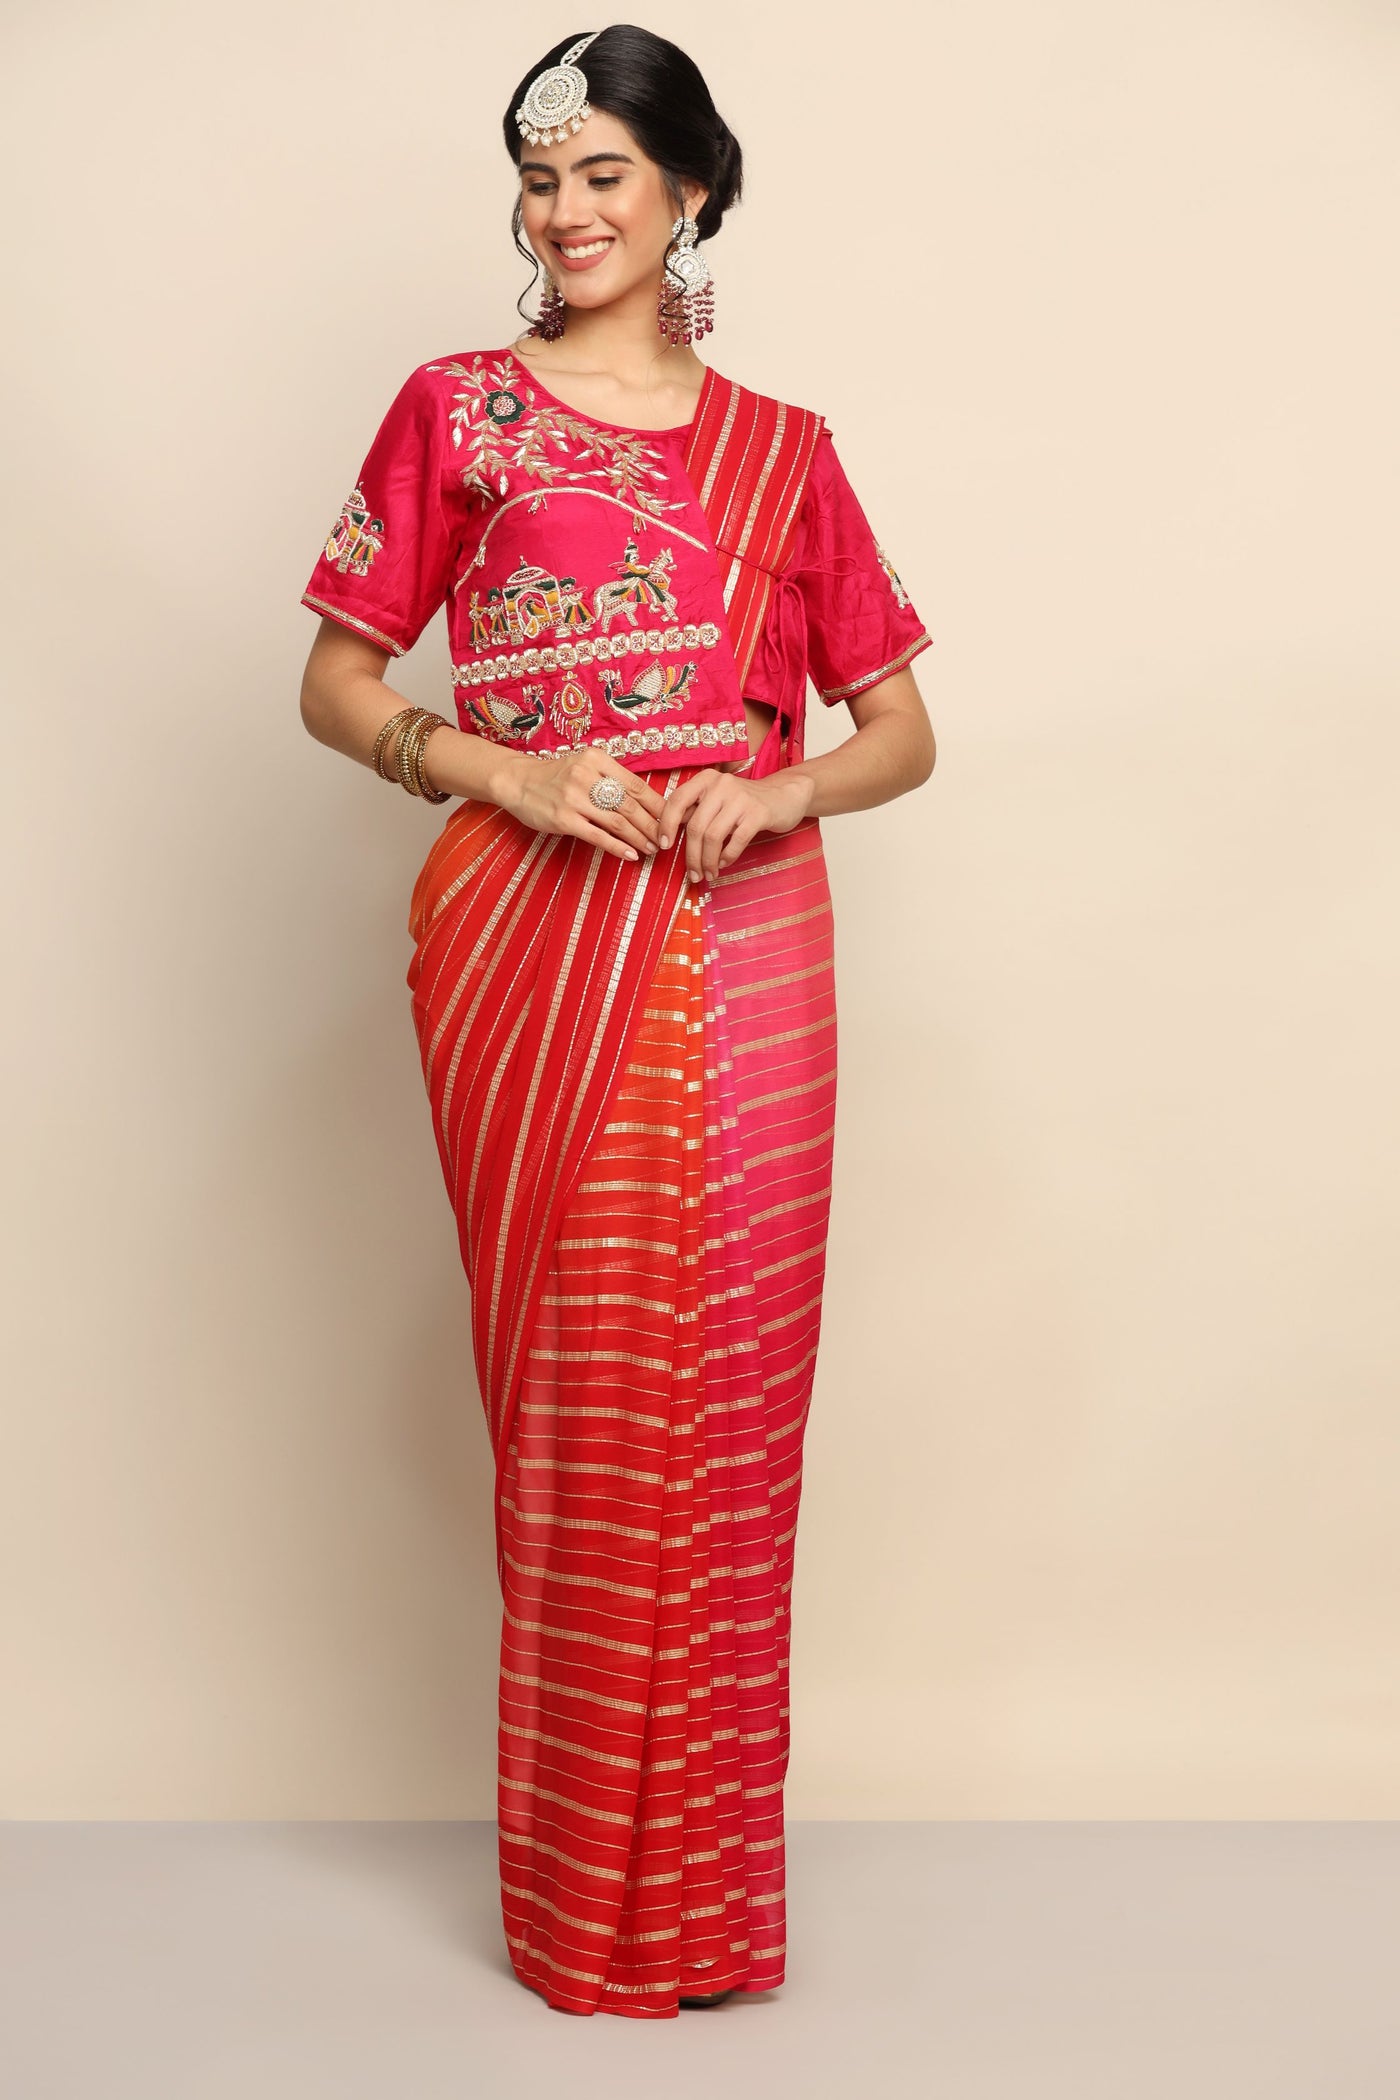 Fascinating Pink and Orange Georgette Saree: A Radiant Fusion